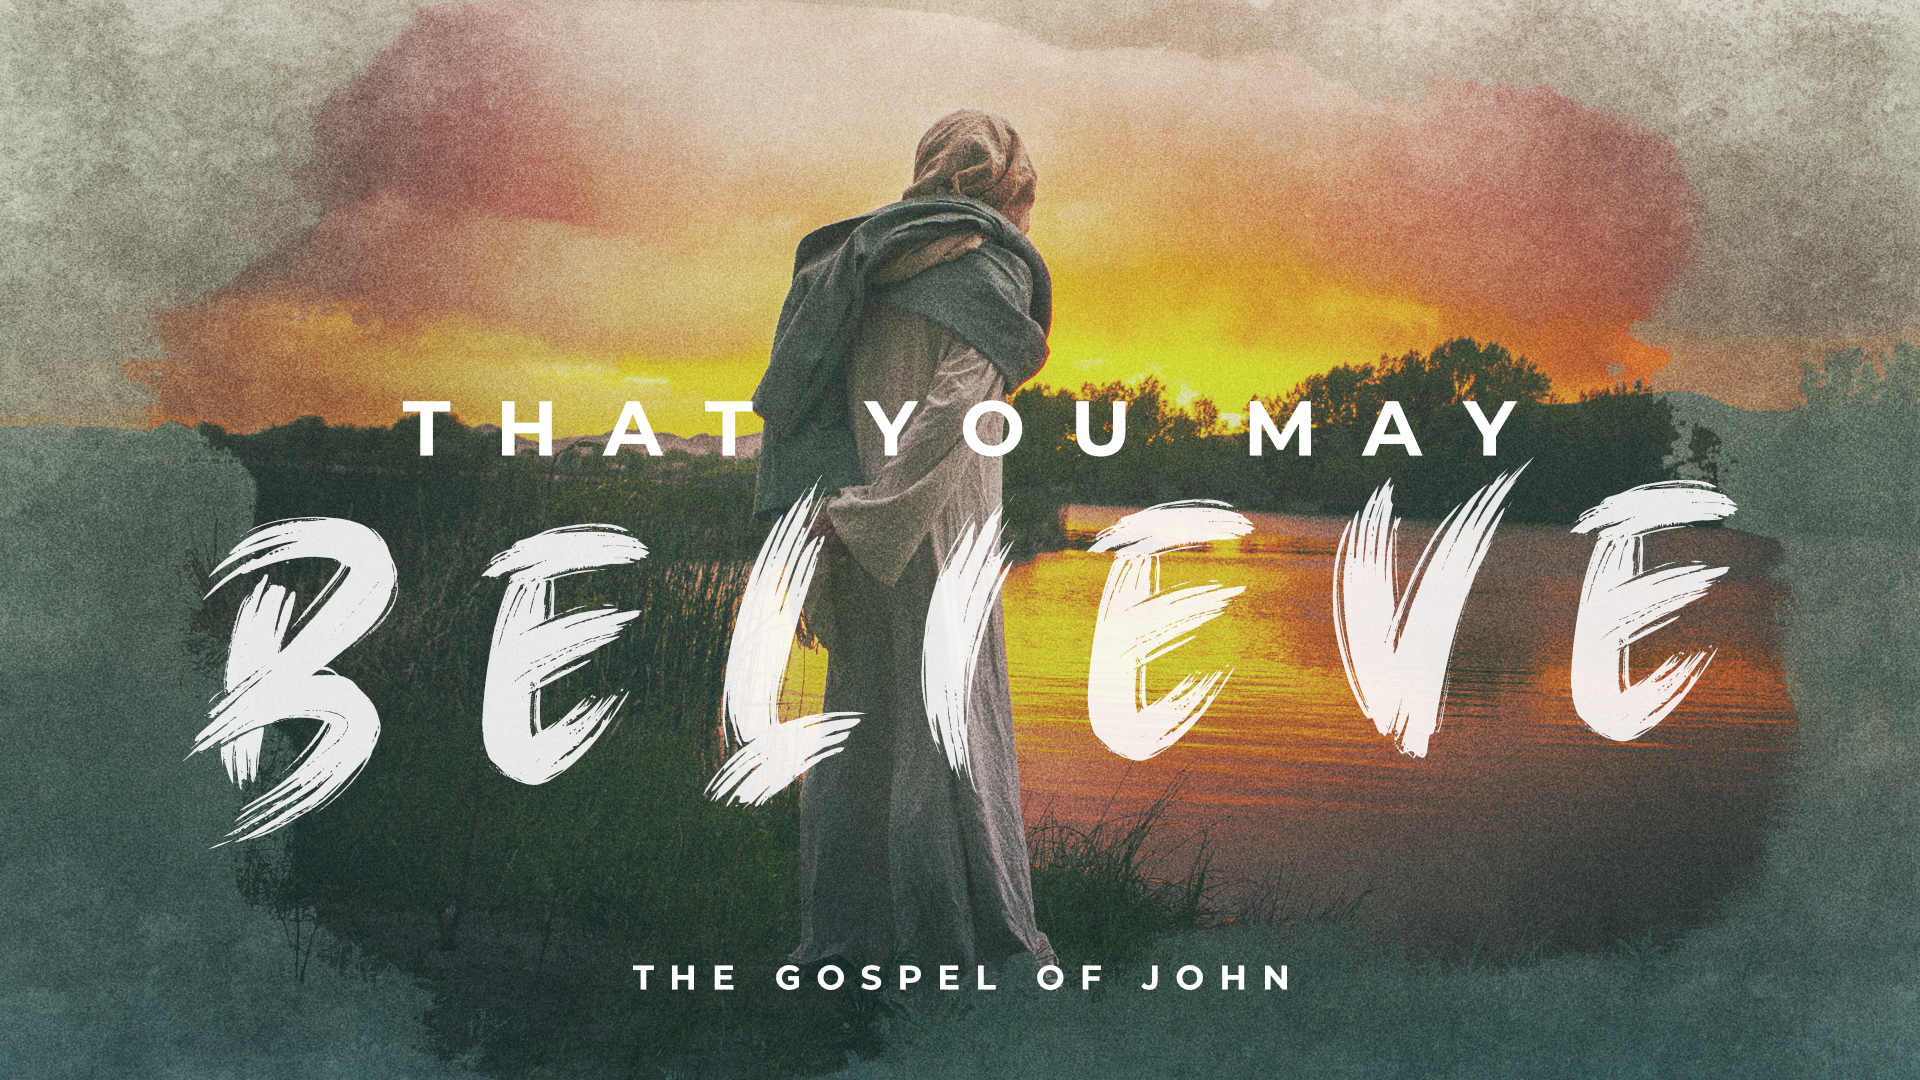 March 5th, 2023 - That You May Believe - Week 67